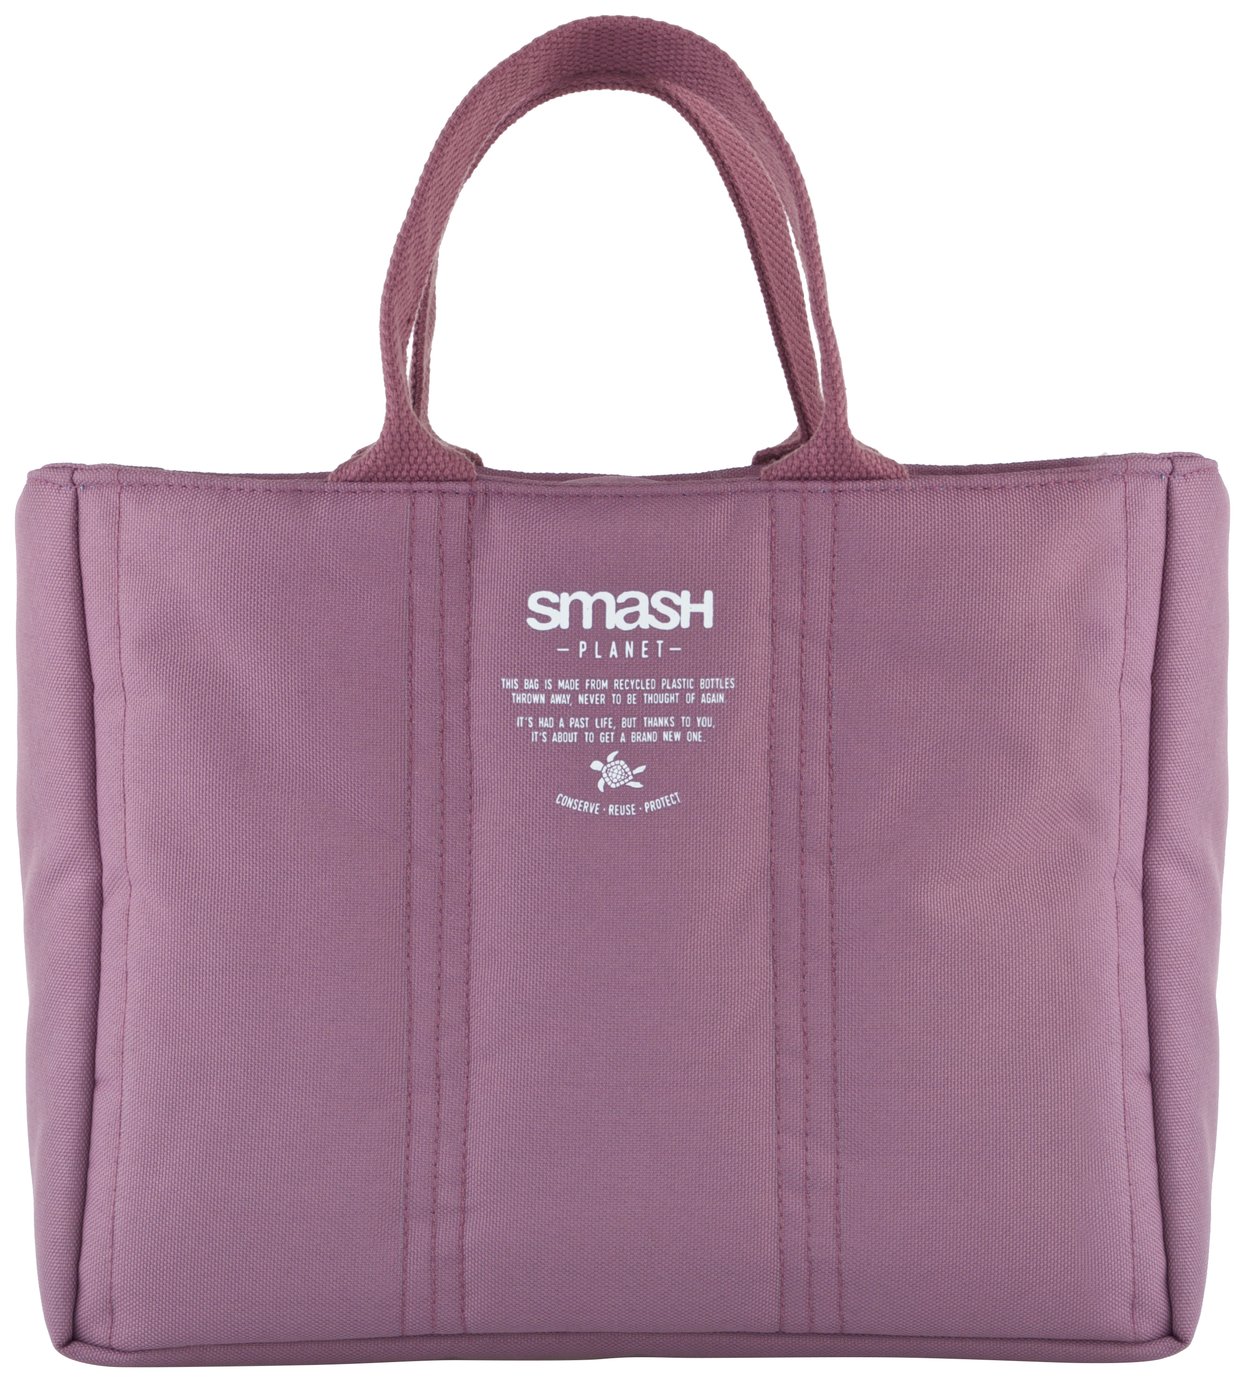 Smash Planet Mulberry Tote Lunch Bag